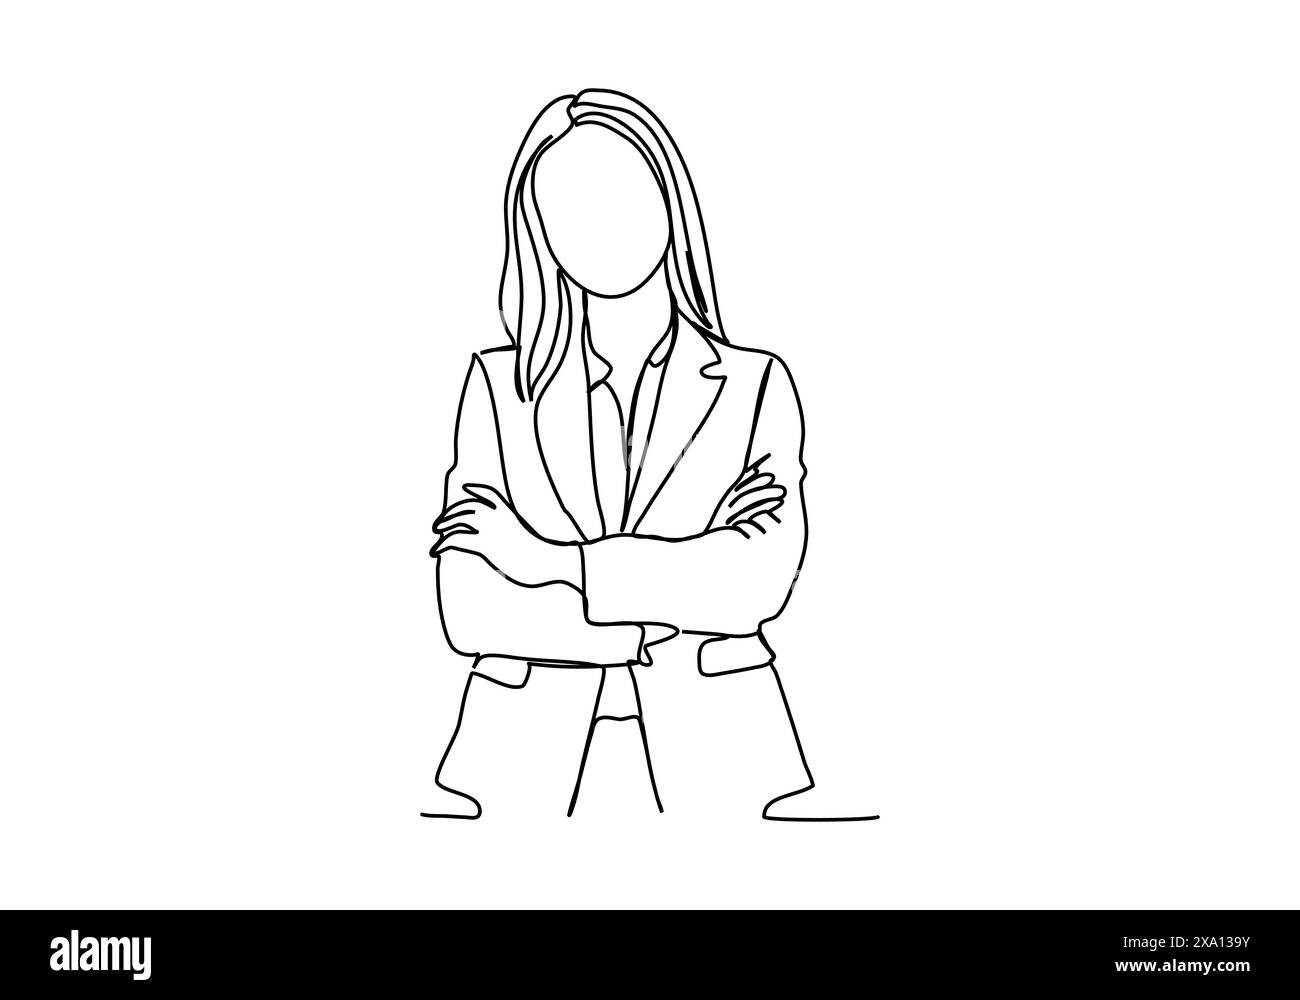 Woman in business suit, one line drawing vector illustration. Stock Vector